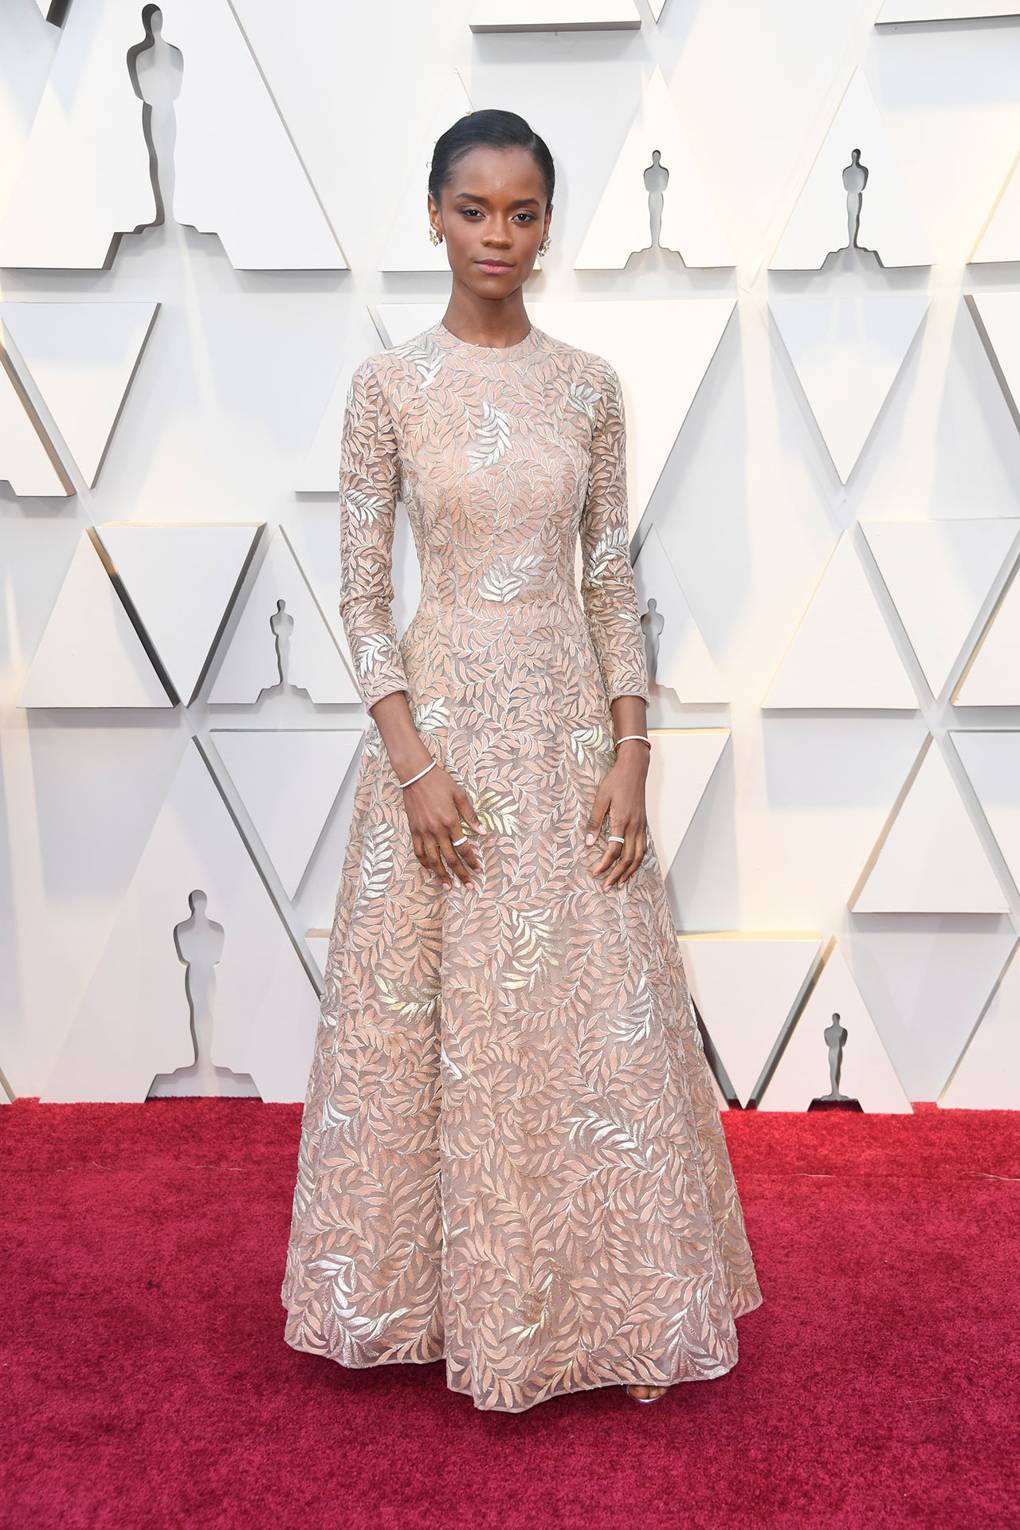 Letitia Wright wearing Dior couture.